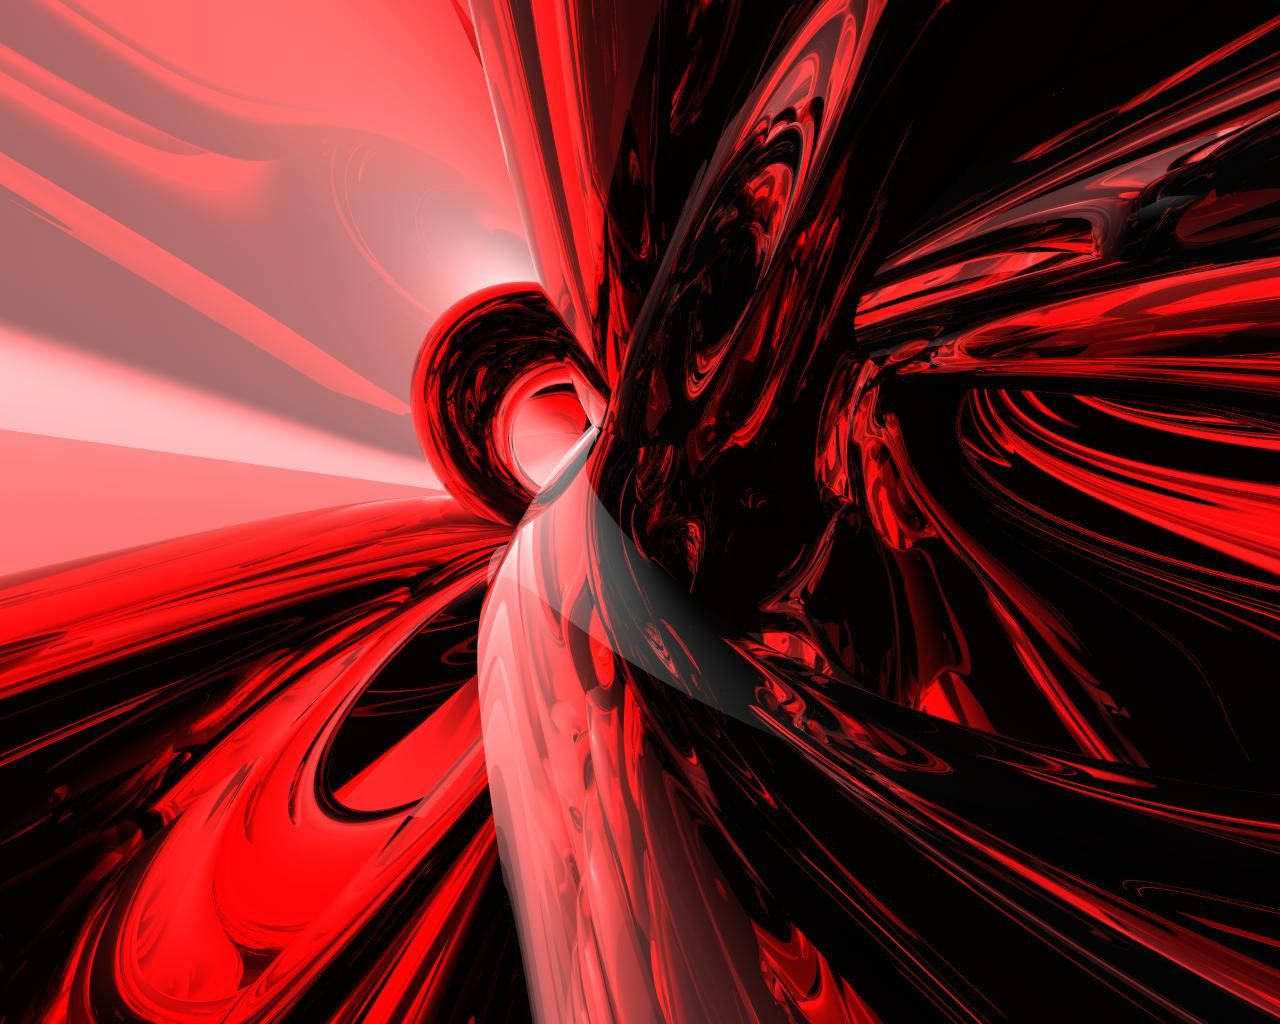 Cool Red And Black Frenzy Background